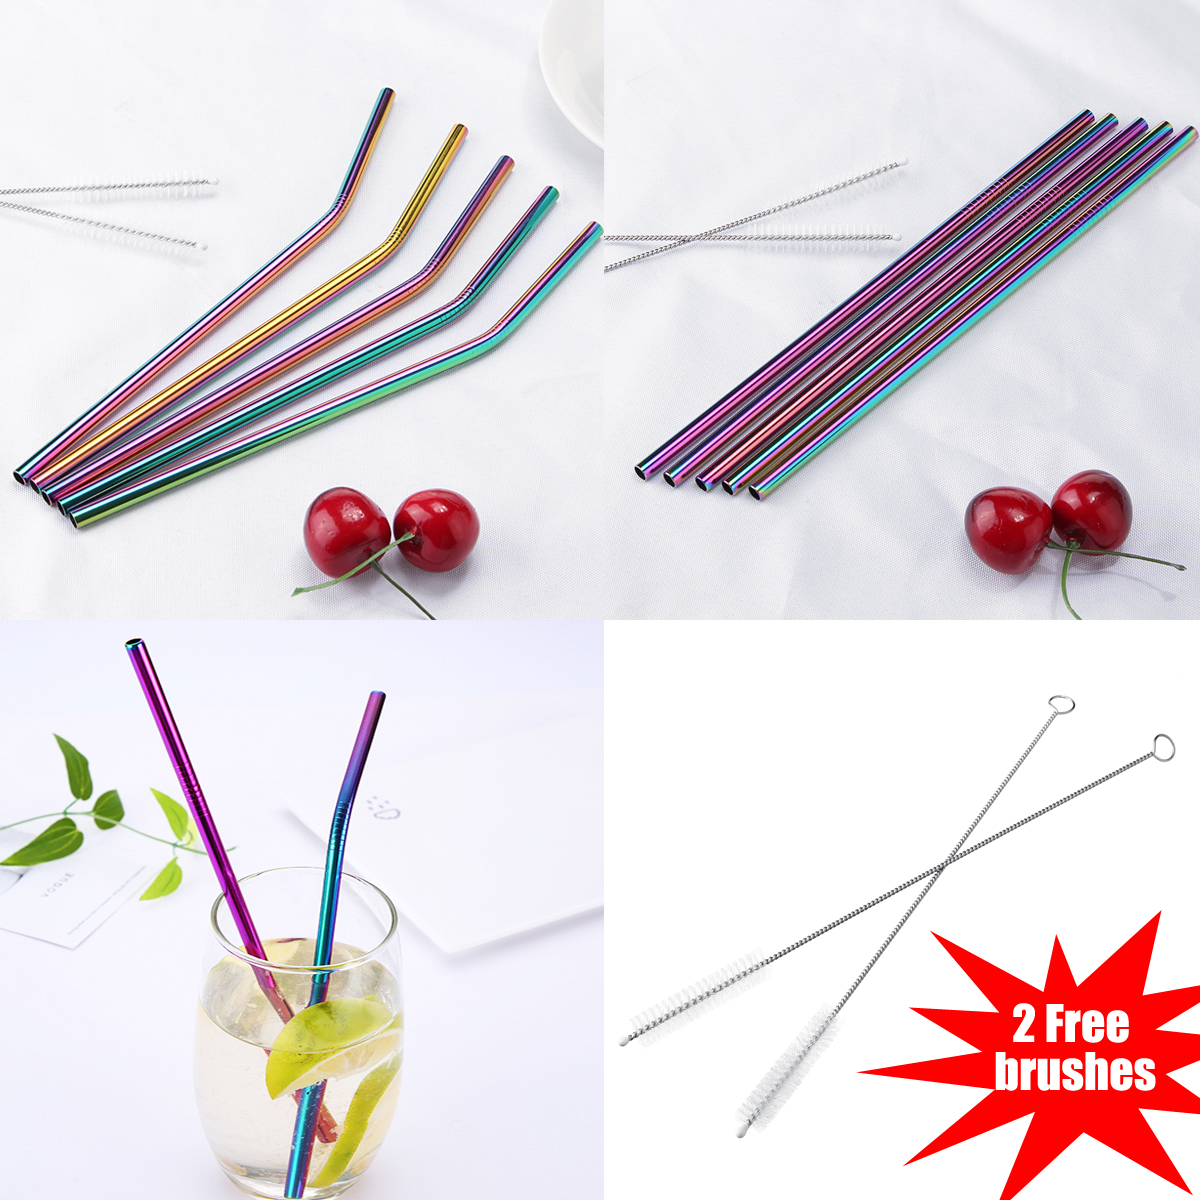 7PCS-Premium-Stainless-Steel-Metal-Drinking-Straw-Reusable-Straws-Set-With-Cleaner-Brushes-1347731-2